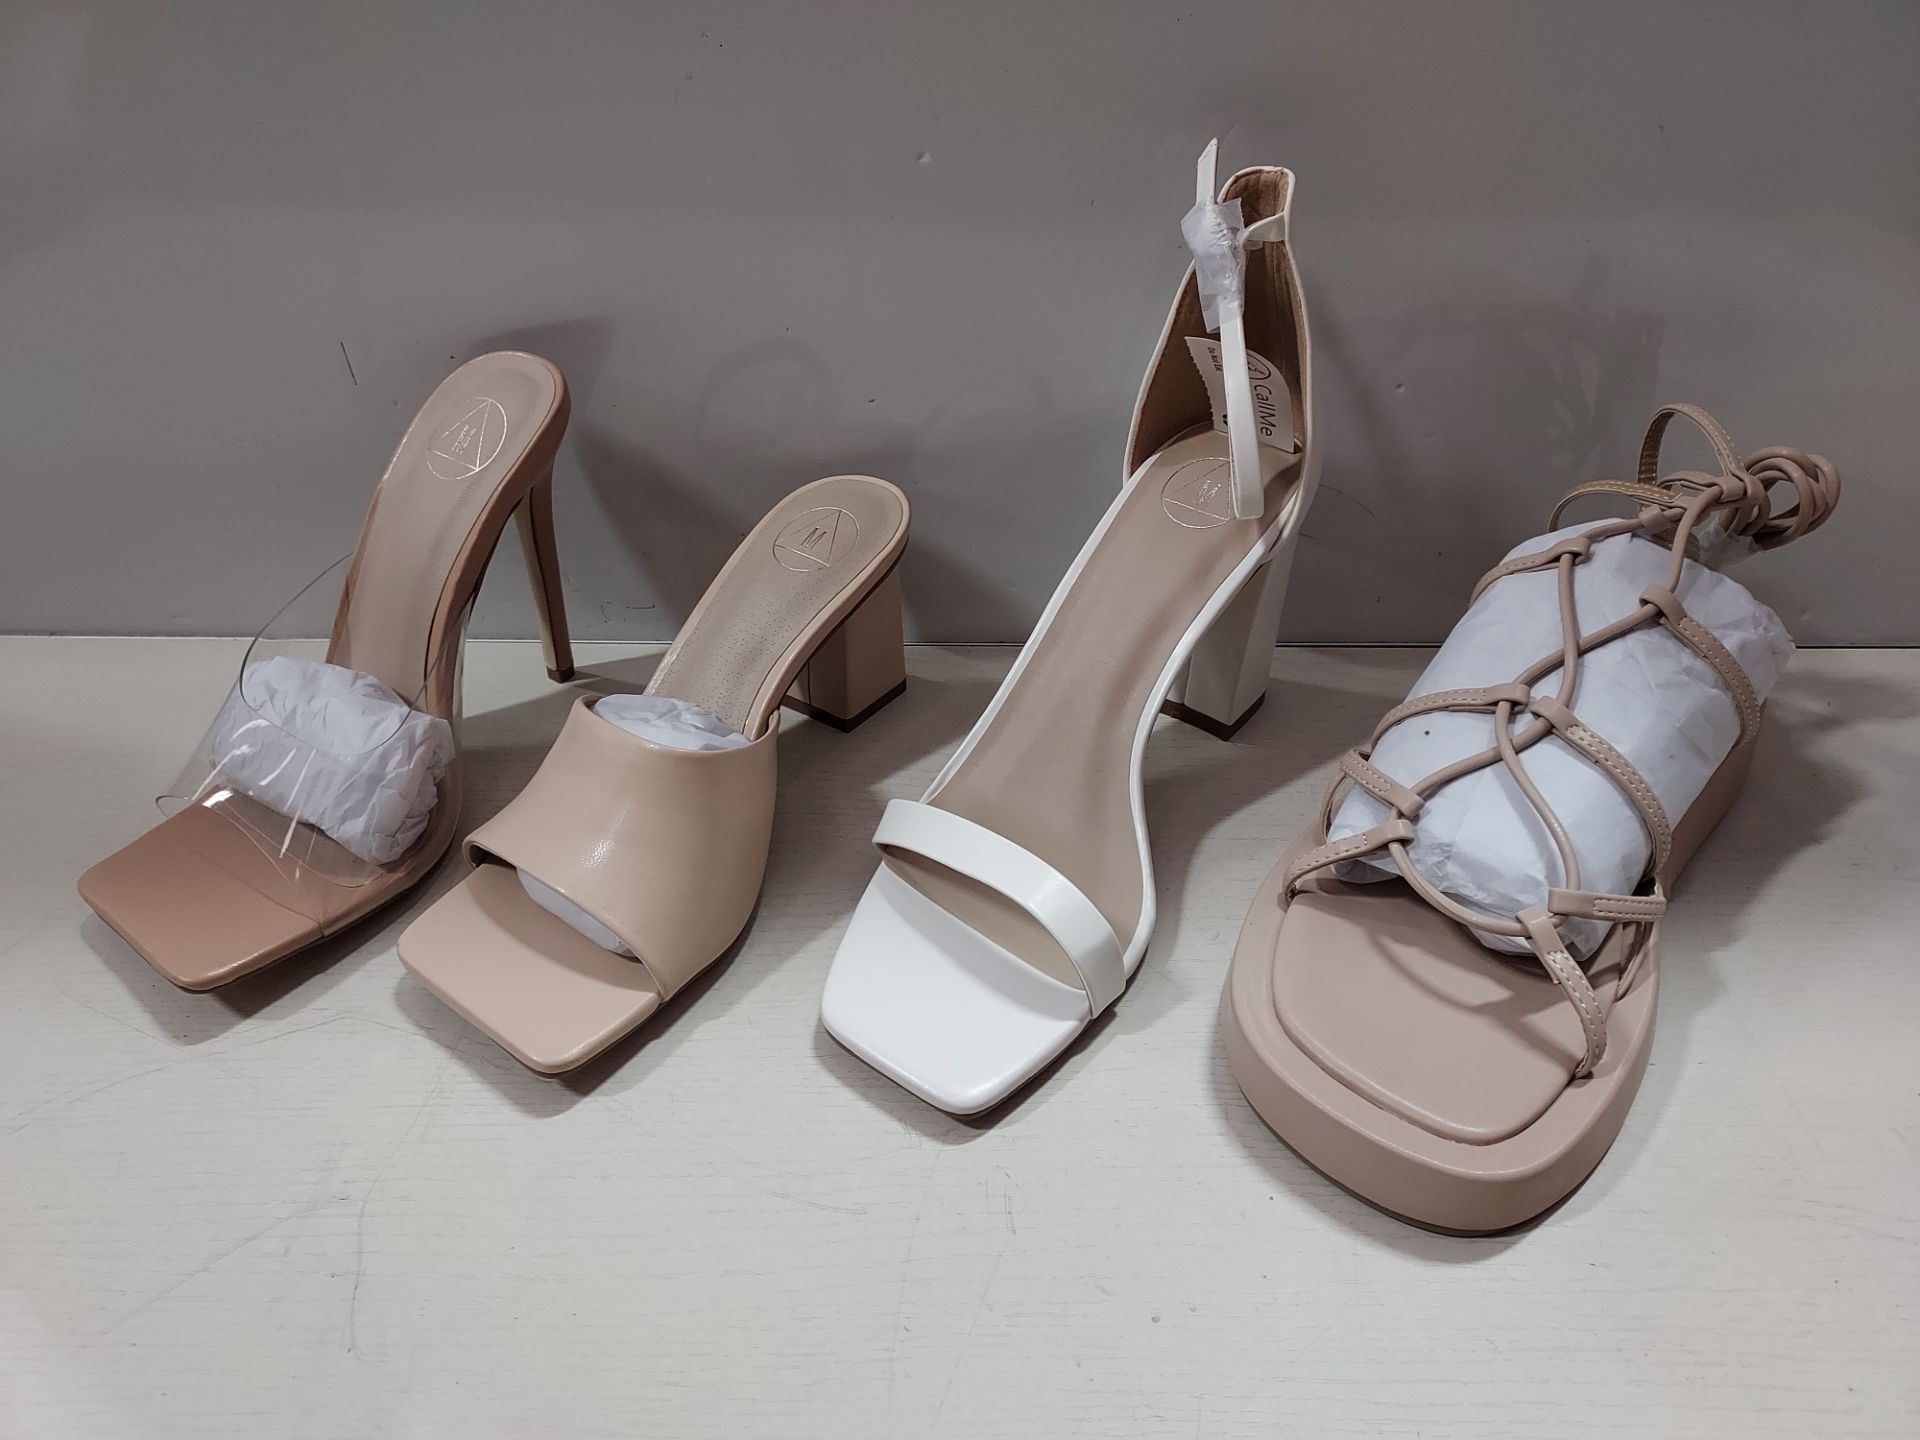 18 X BRAND NEW MIXED MISSGUIDED WOMANS SHOES TO INCLUDE CHUNKY FLATFORM GLADIATOR SANDAL / SQUARE